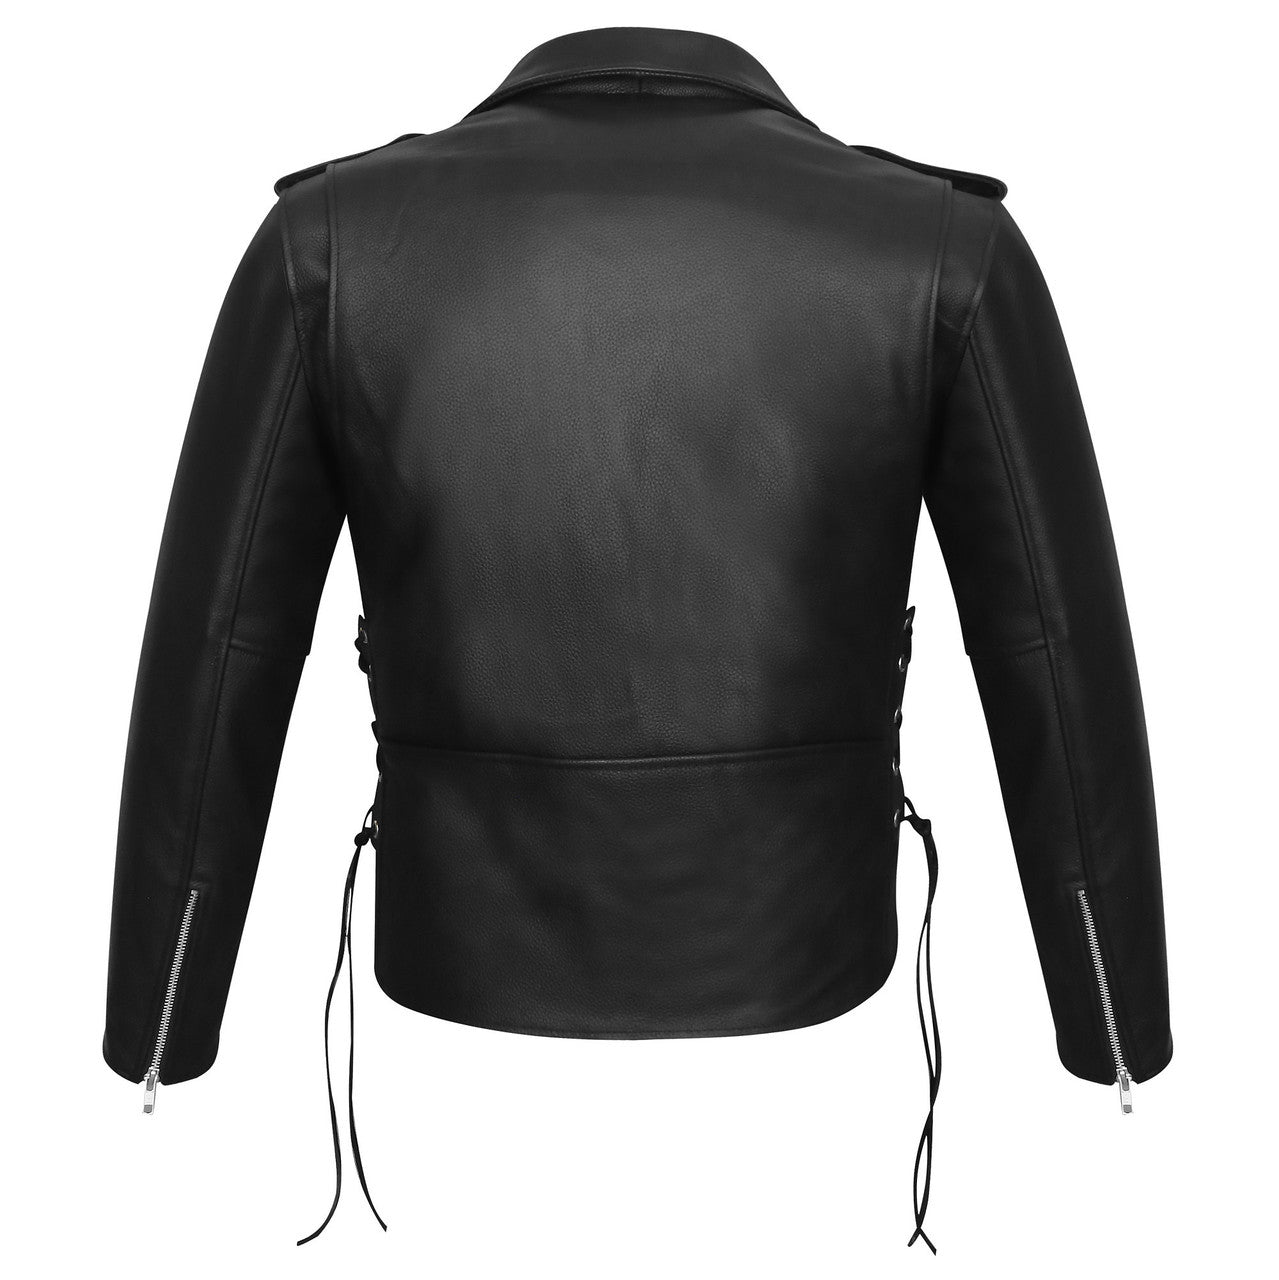 Men's-Premium-Classic-Police-Style-Motorcycle-Black-Leather-Jacket-Conceal-Carry-Side-lace-Removeable-Quilted-Liner-back-view